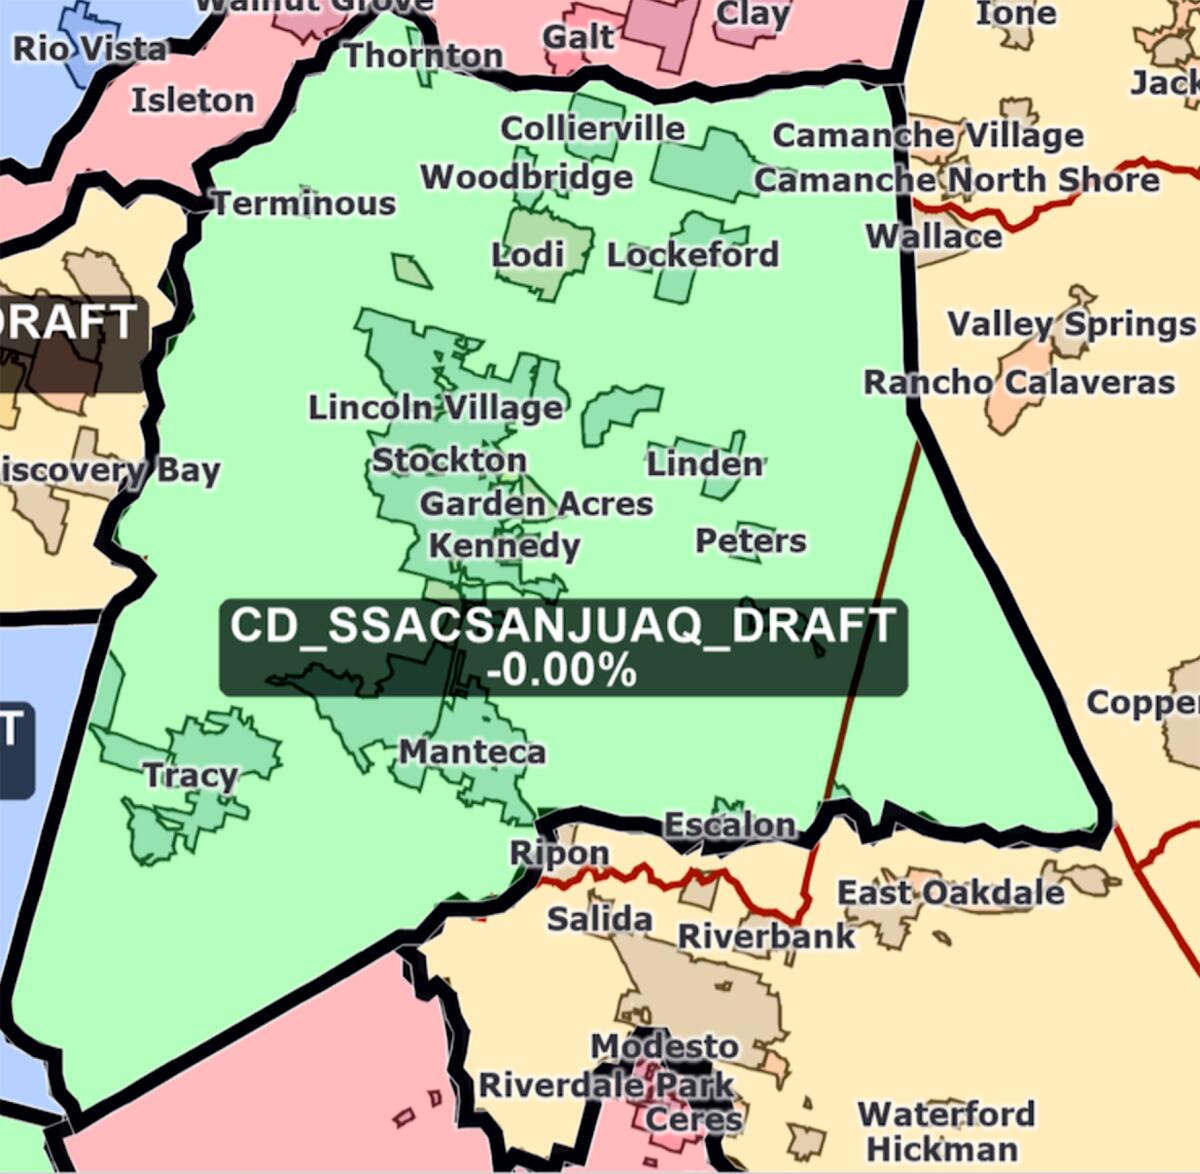 The congressional district in question shows San Joaquin county.